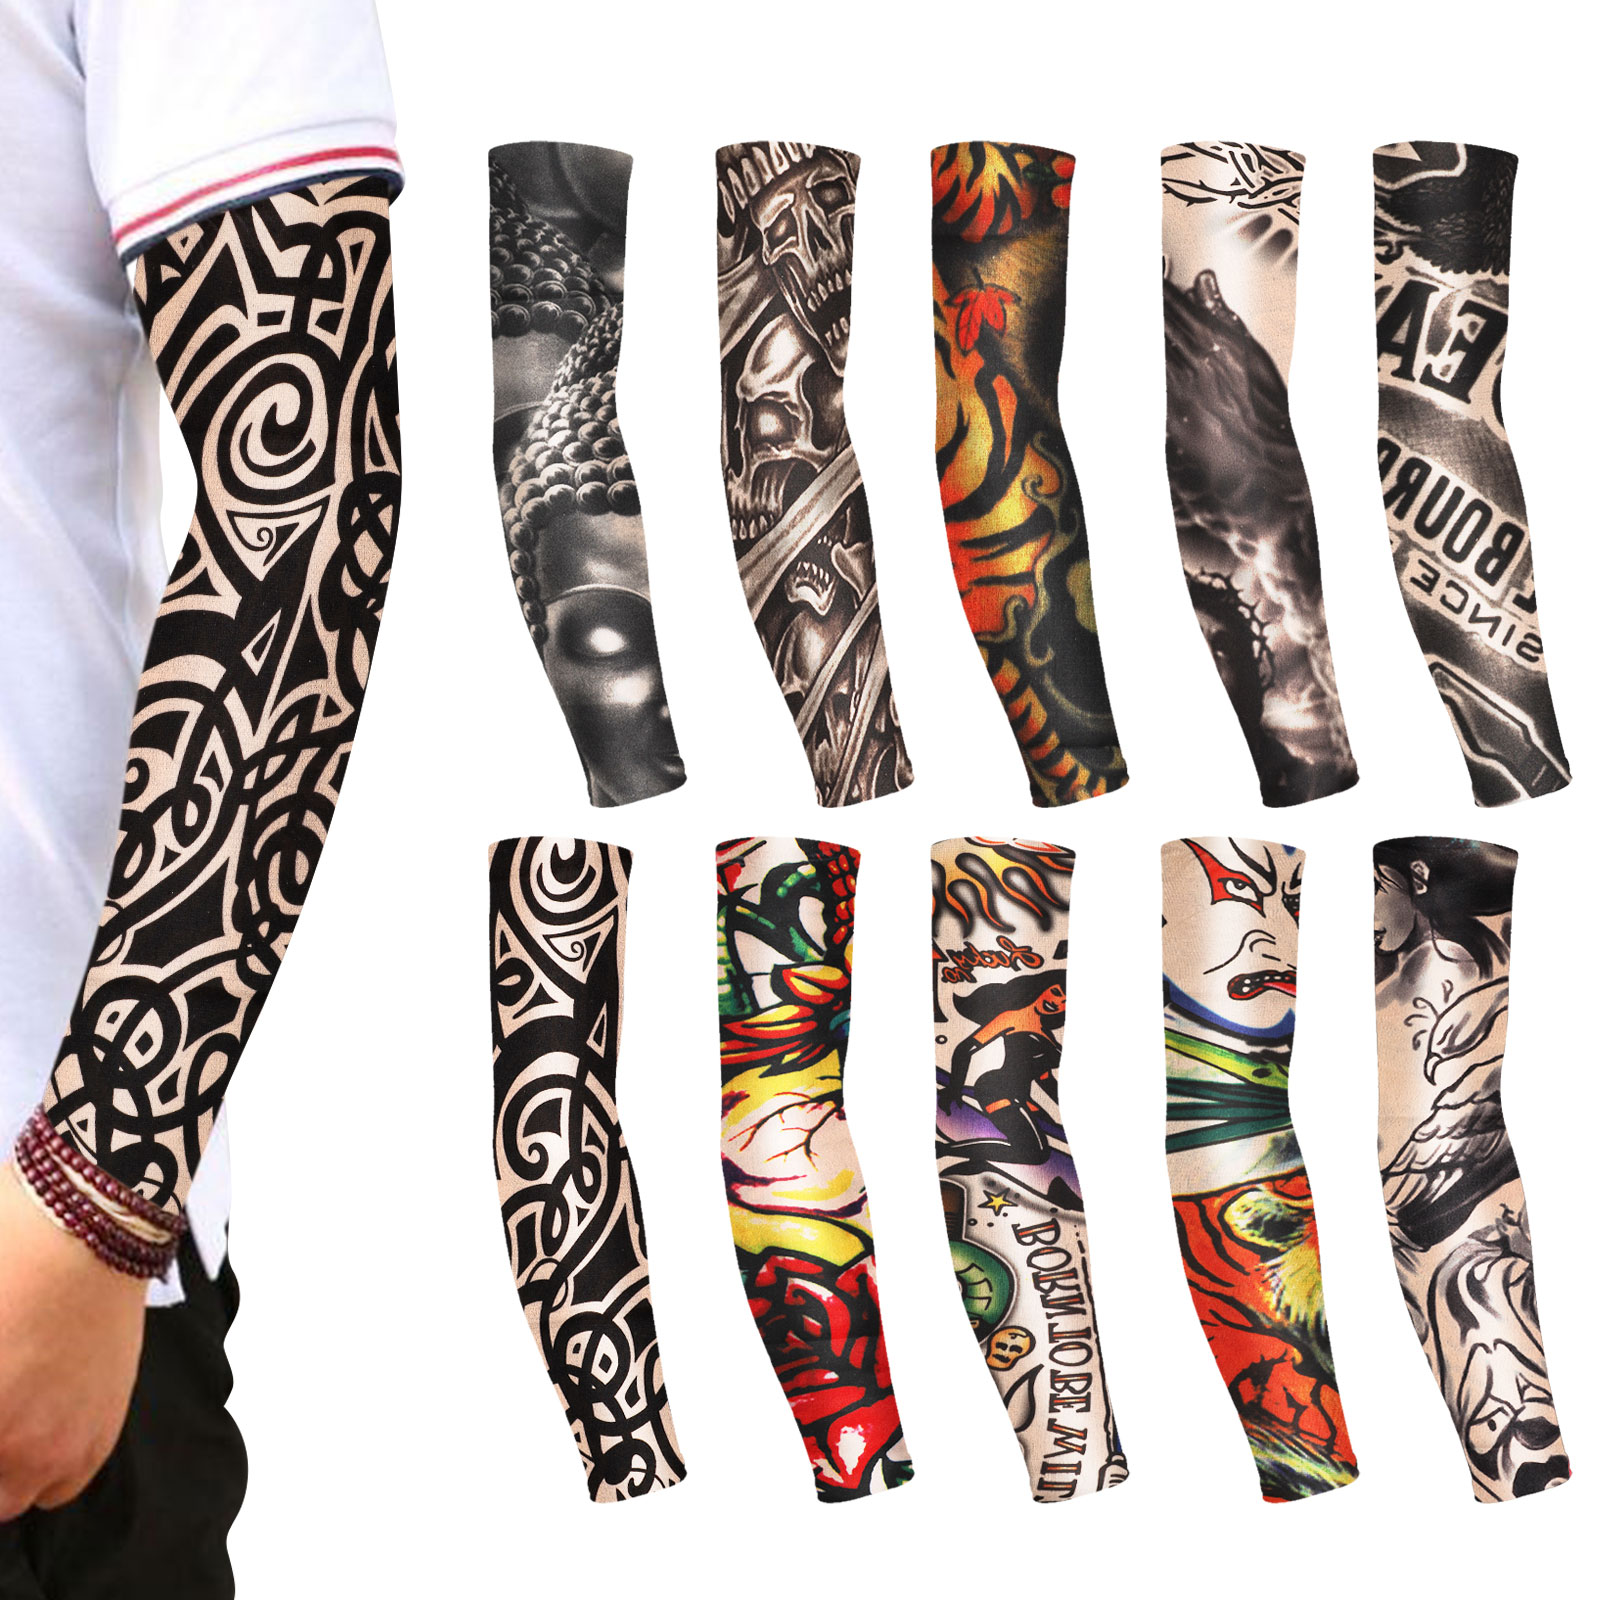  PAILON Skull Octopus Tentacle Cooling Volleyball Arm Sleeves  For Men Women, Uv Protection Sleeves For Women Baseball Arm Sleeves,  Cooling Sleeves Sports Forearm Arm Sleeve Sunblock Arm Sleeves : Sports 